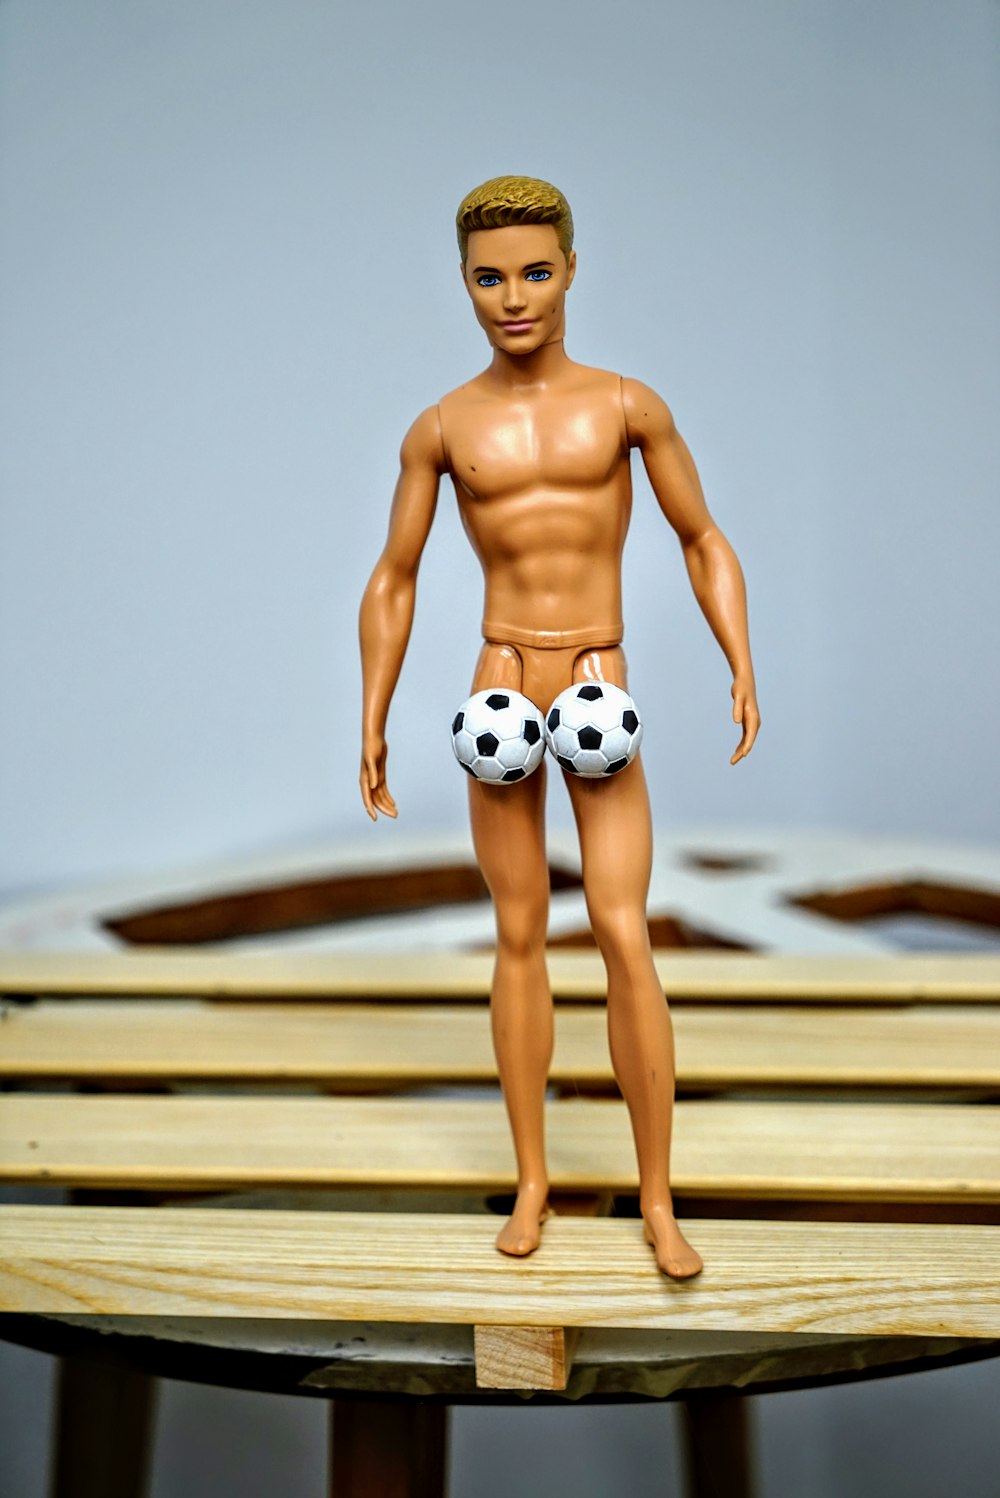 Ken doll on brown surface